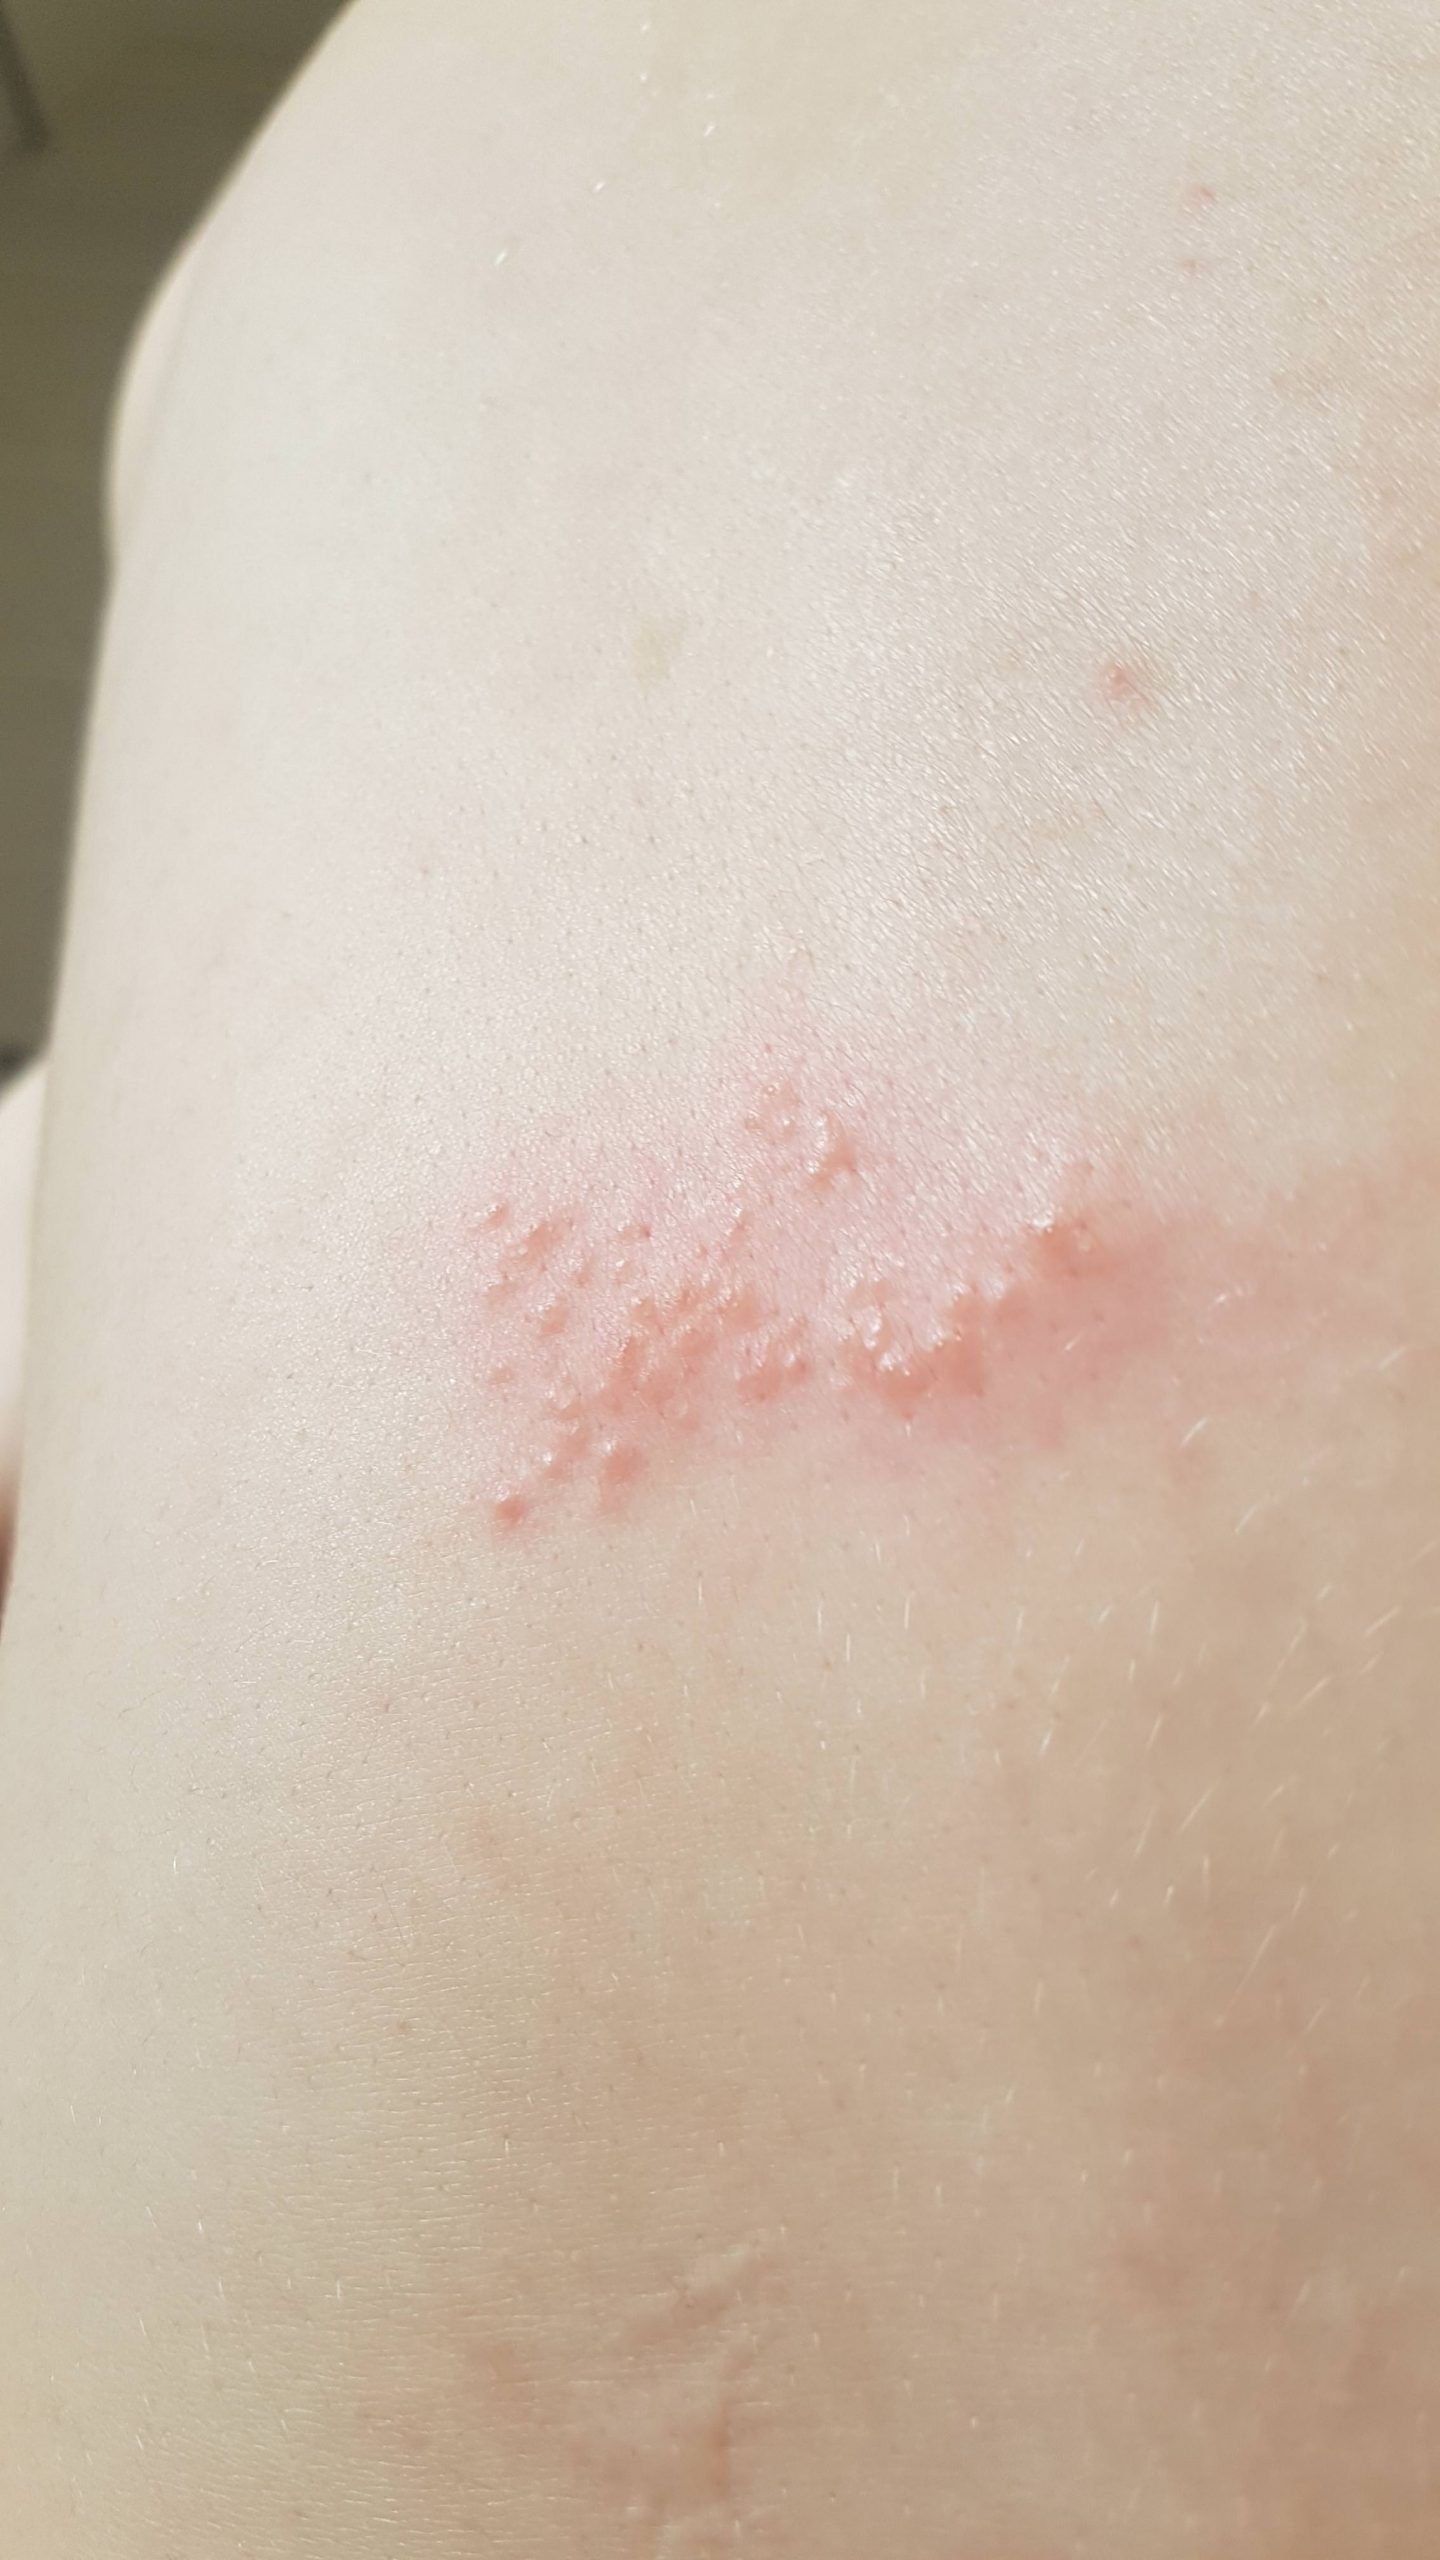 Could this be another Psoriasis breakout or something else ...